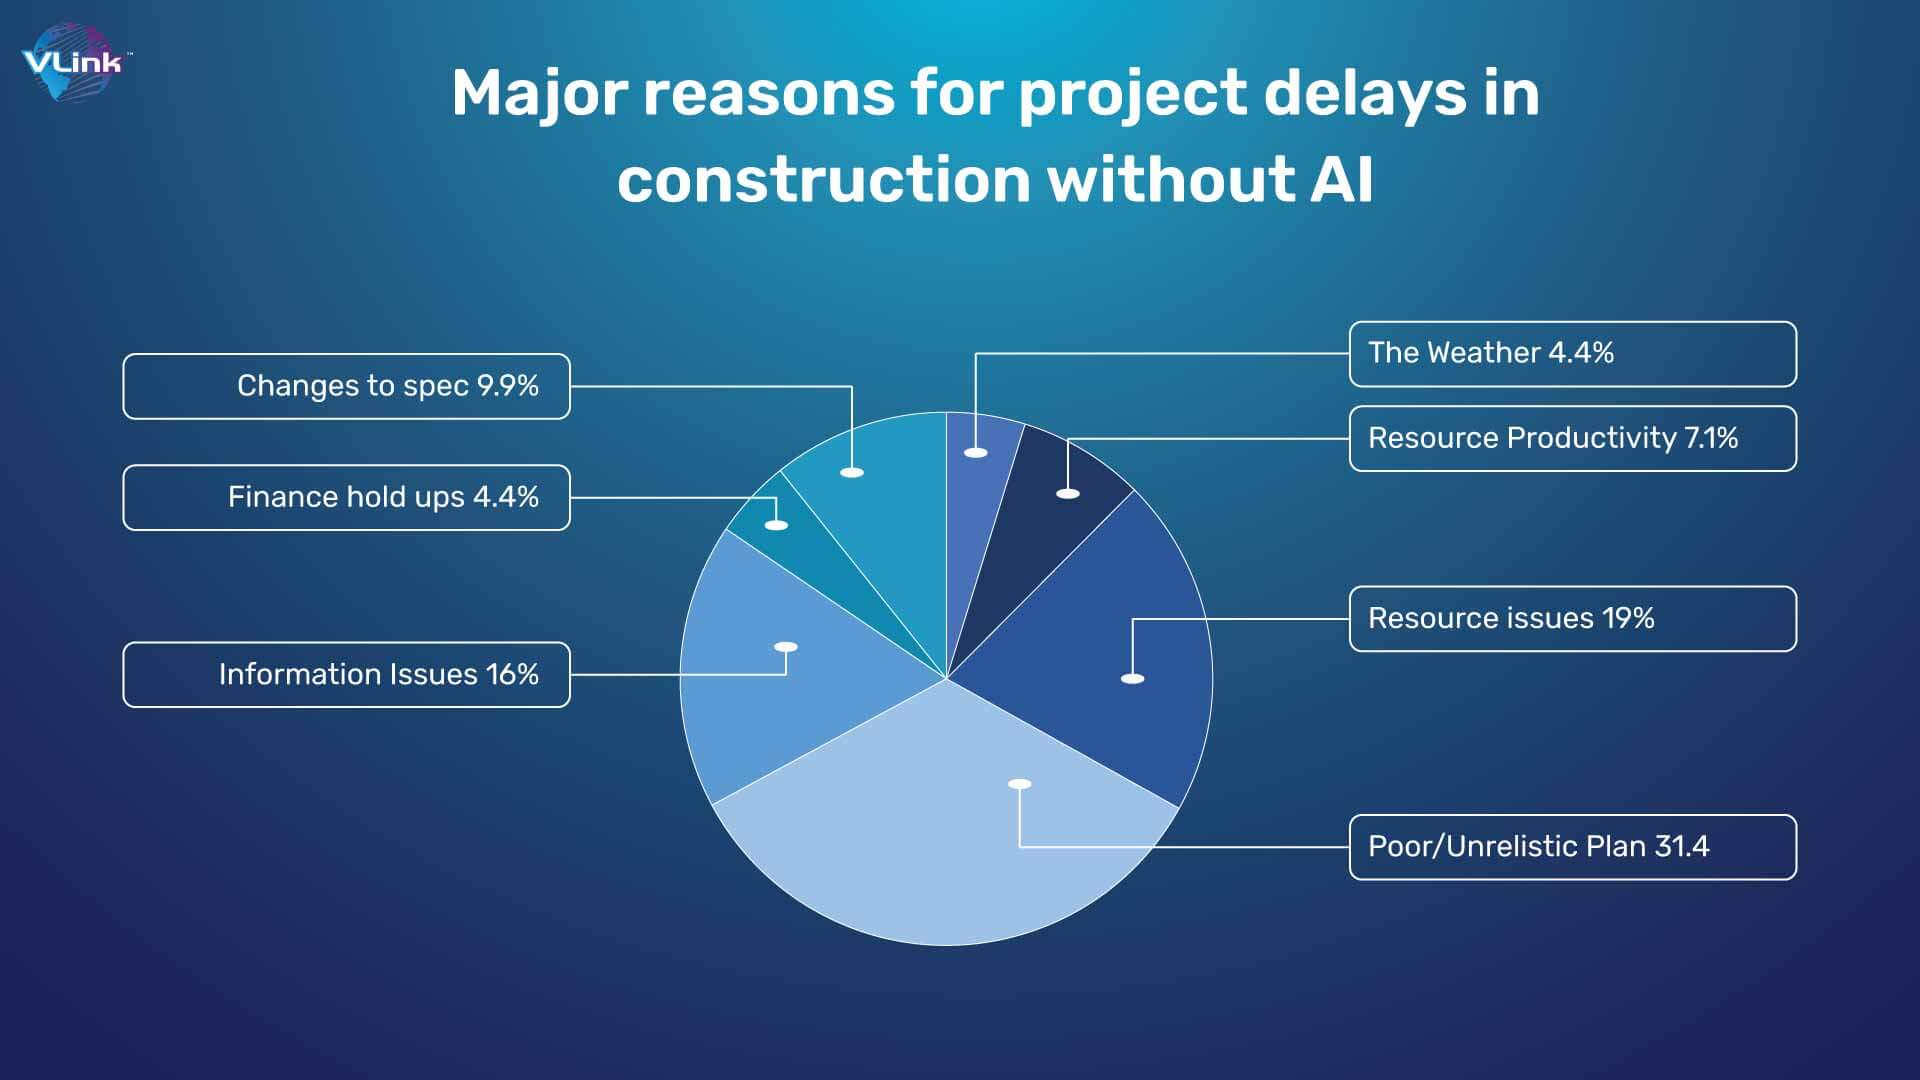 Major reasons for project delays in construction without AI